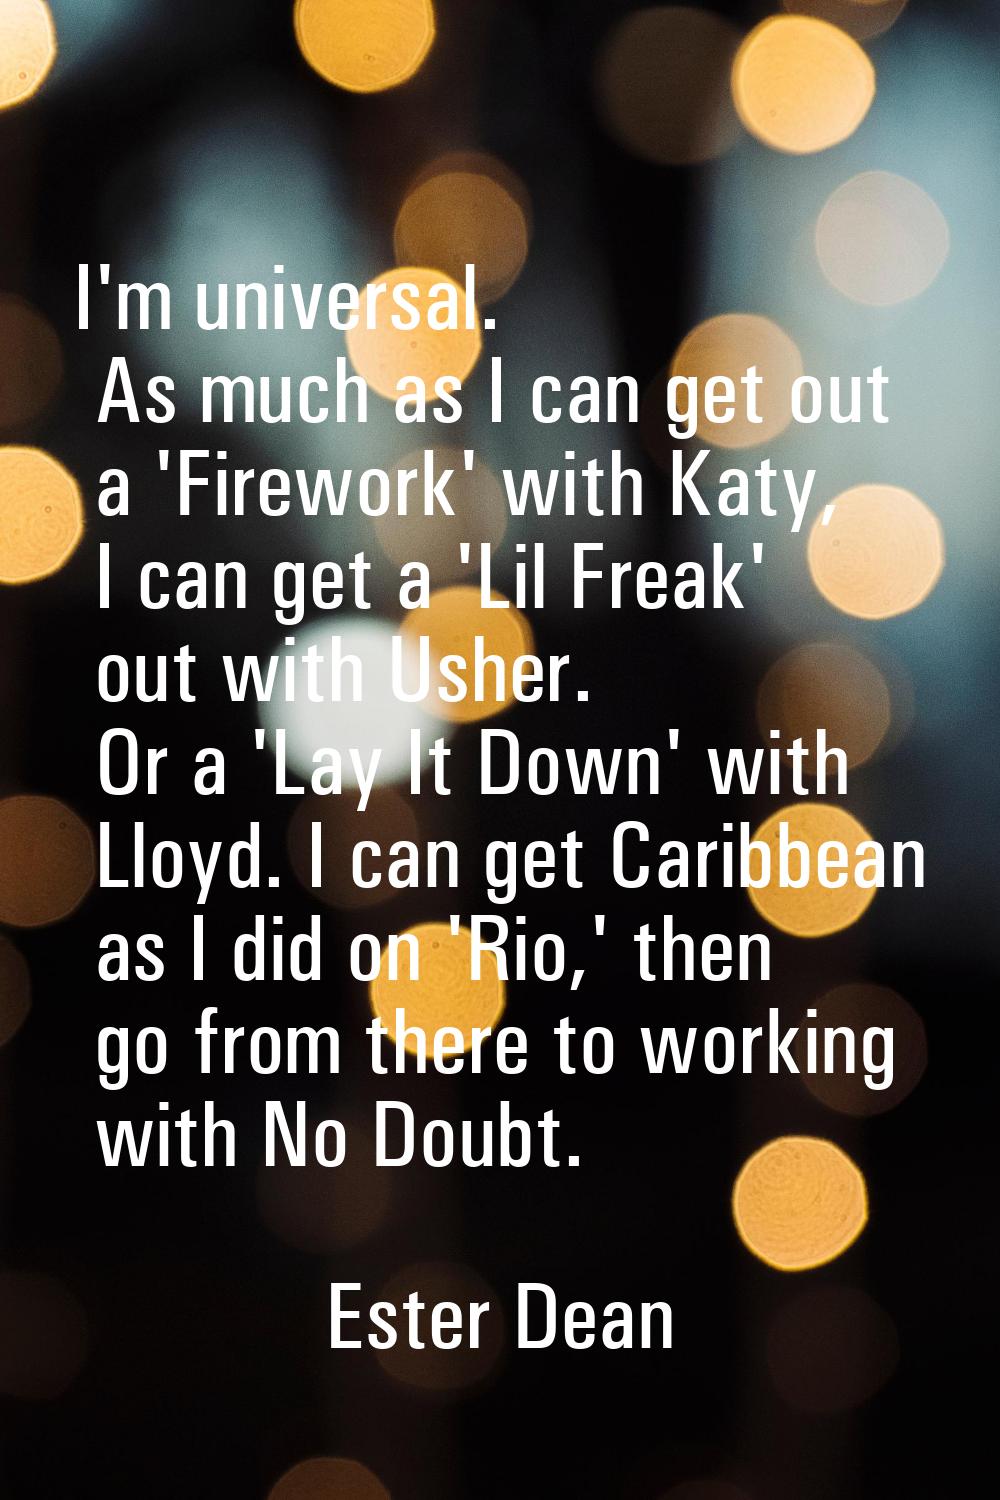 I'm universal. As much as I can get out a 'Firework' with Katy, I can get a 'Lil Freak' out with Us